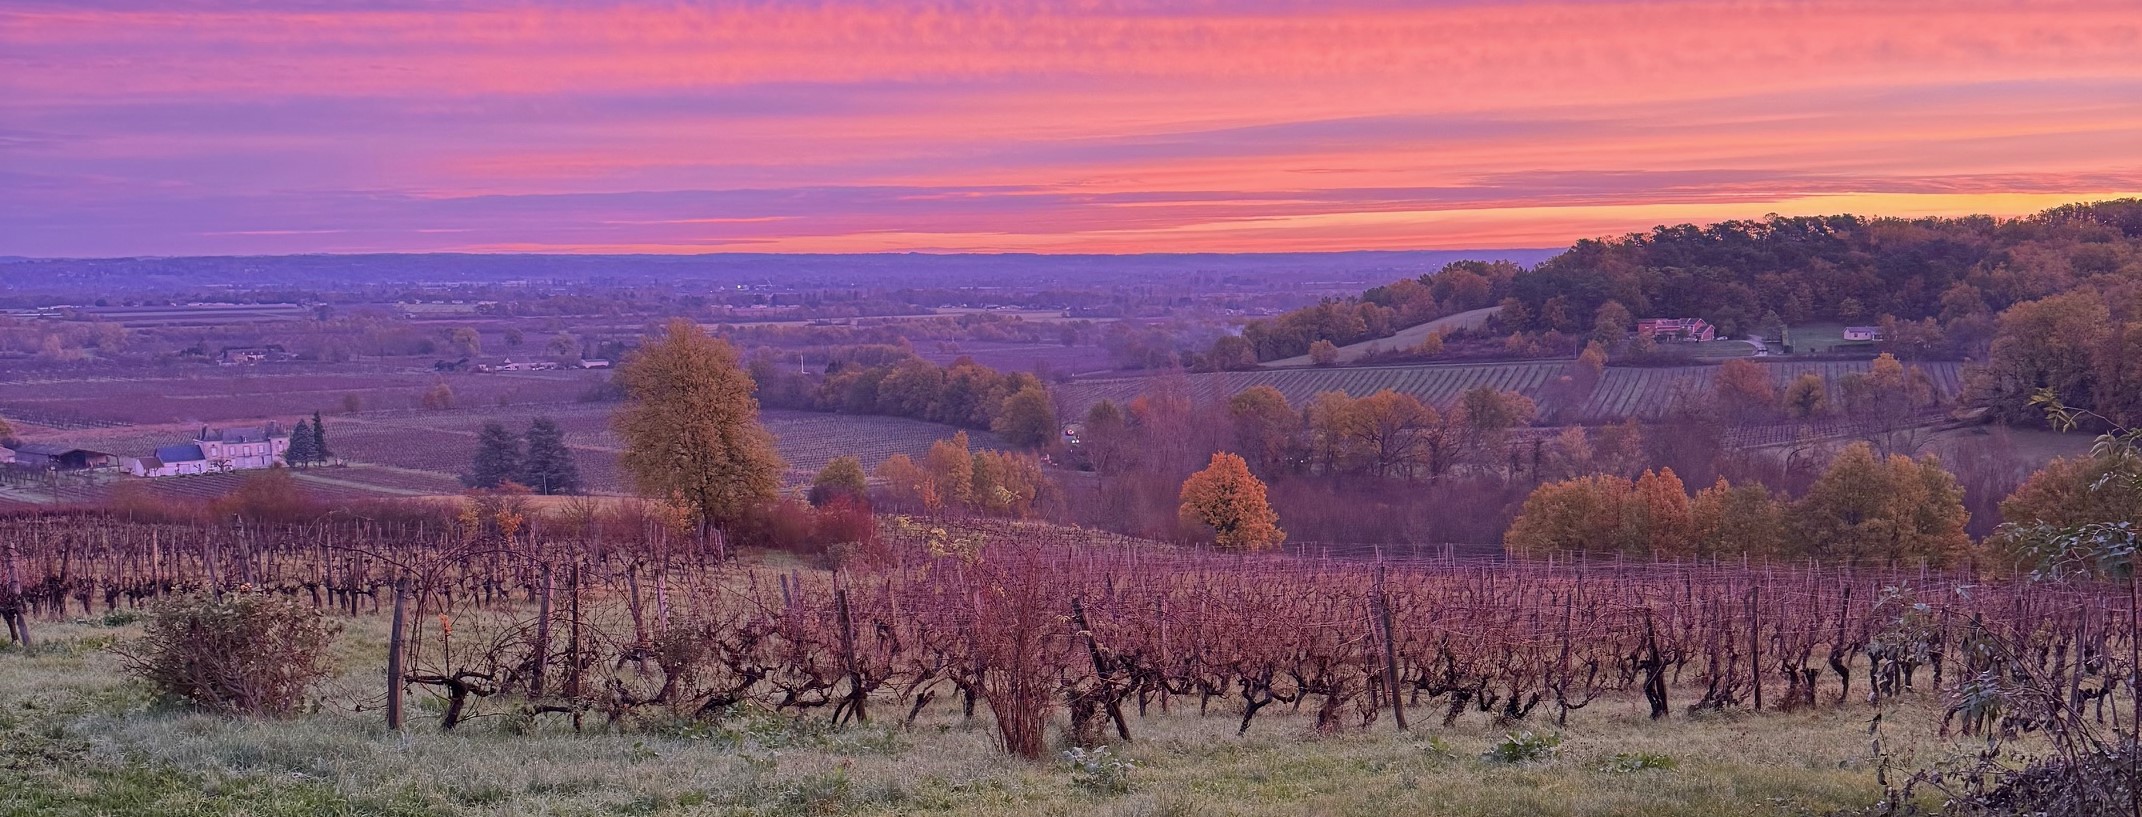 Chateau Feely Vineyard in France in Winter